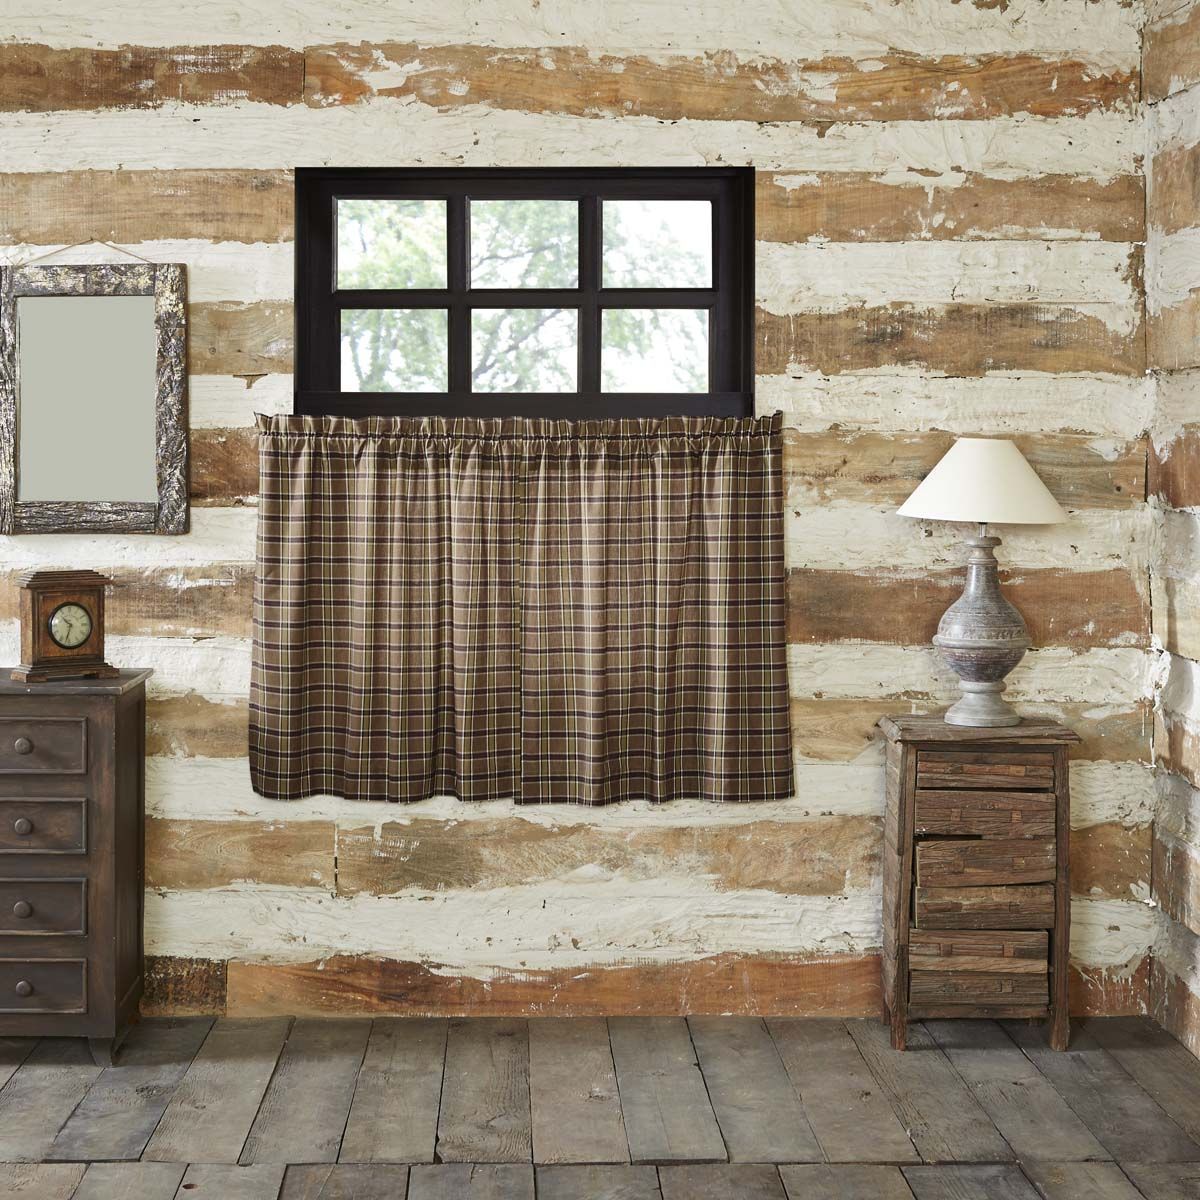 Khaki Tan Rustic & Lodge Kitchen Curtains Wyatt Rod Pocket Cotton Plaid  24x36 Tier Pair For Rustic Kitchen Curtains (View 13 of 20)